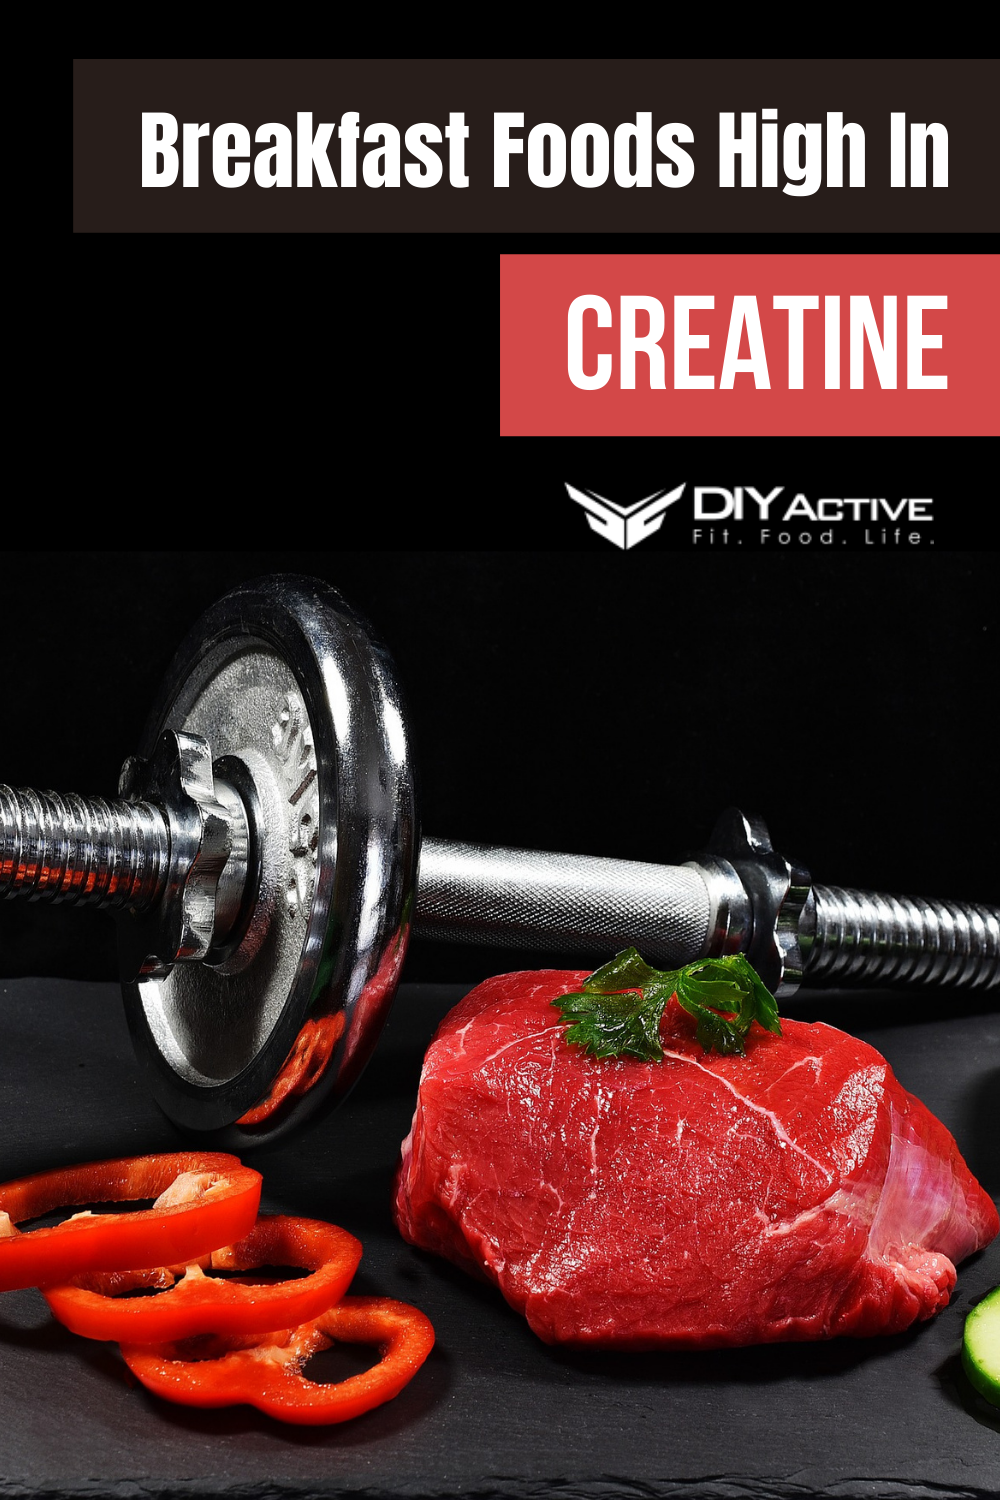 Breakfast Foods High In Creatine You Can Try at Home